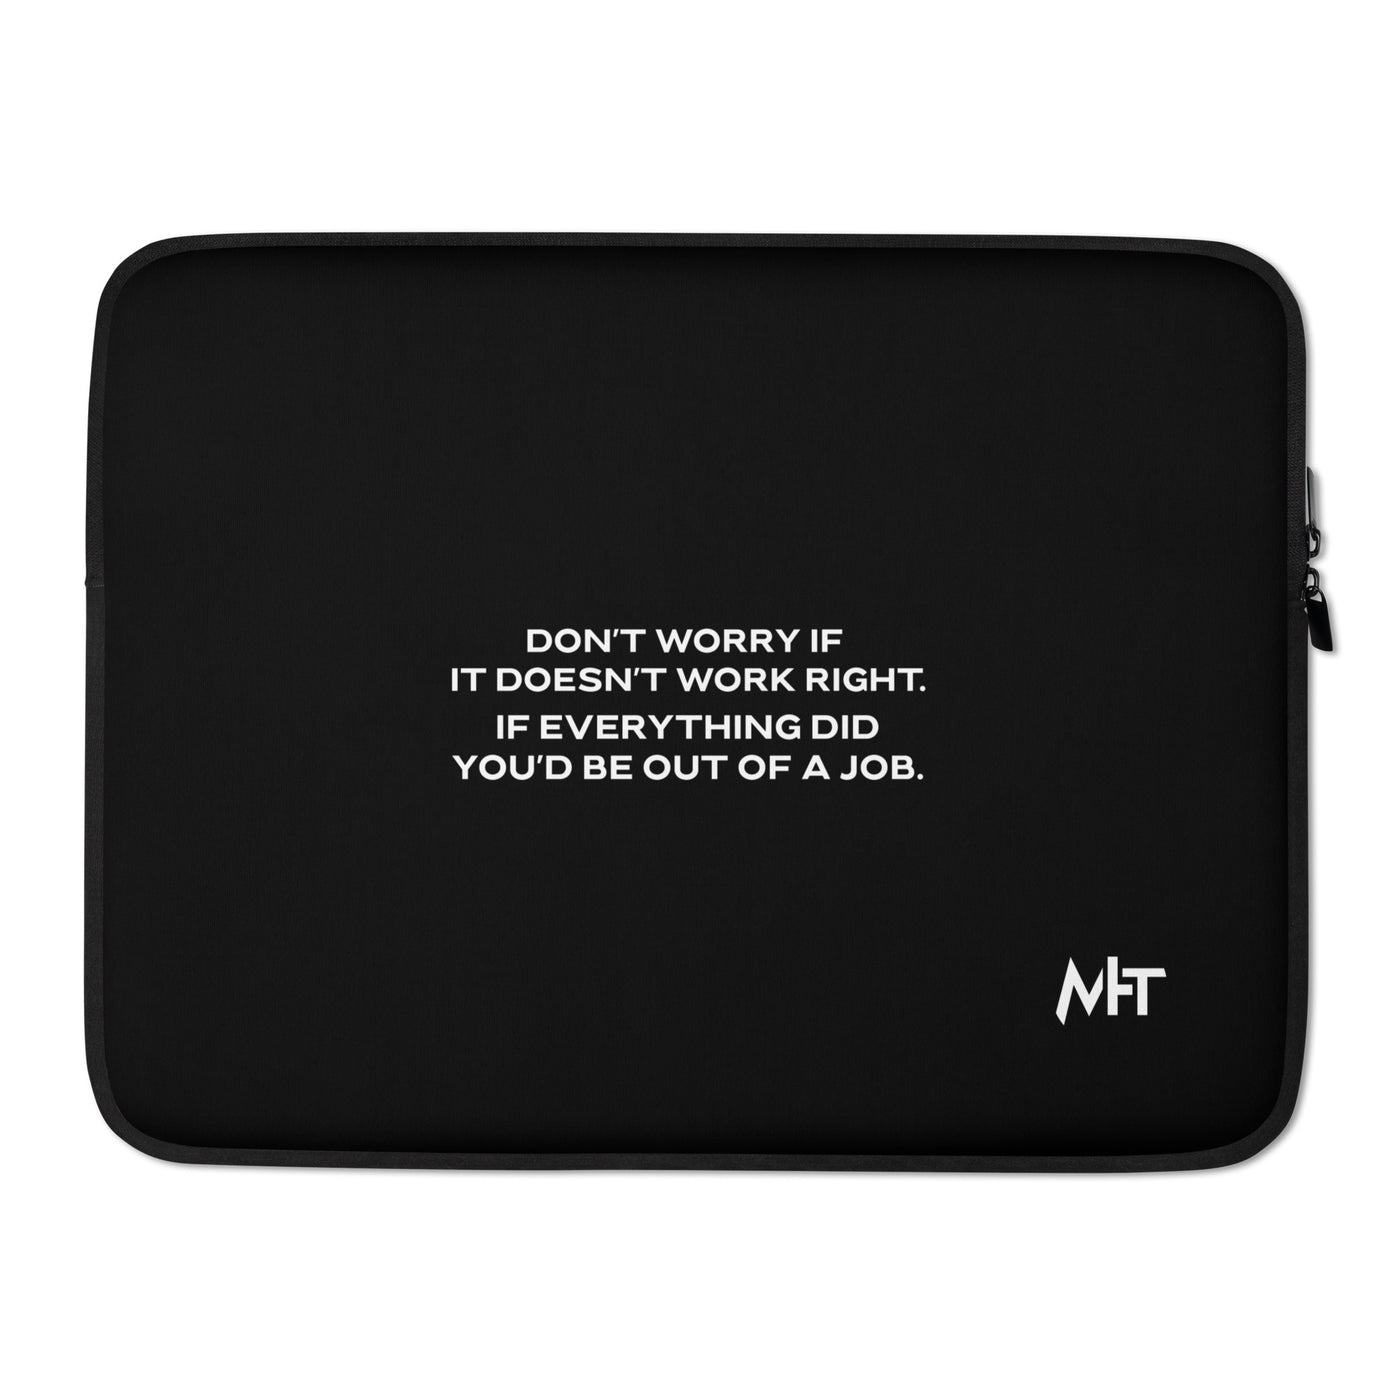 Don't worry if it doesn't work right: if everything did, you would be out of your job V1 - Laptop Sleeve